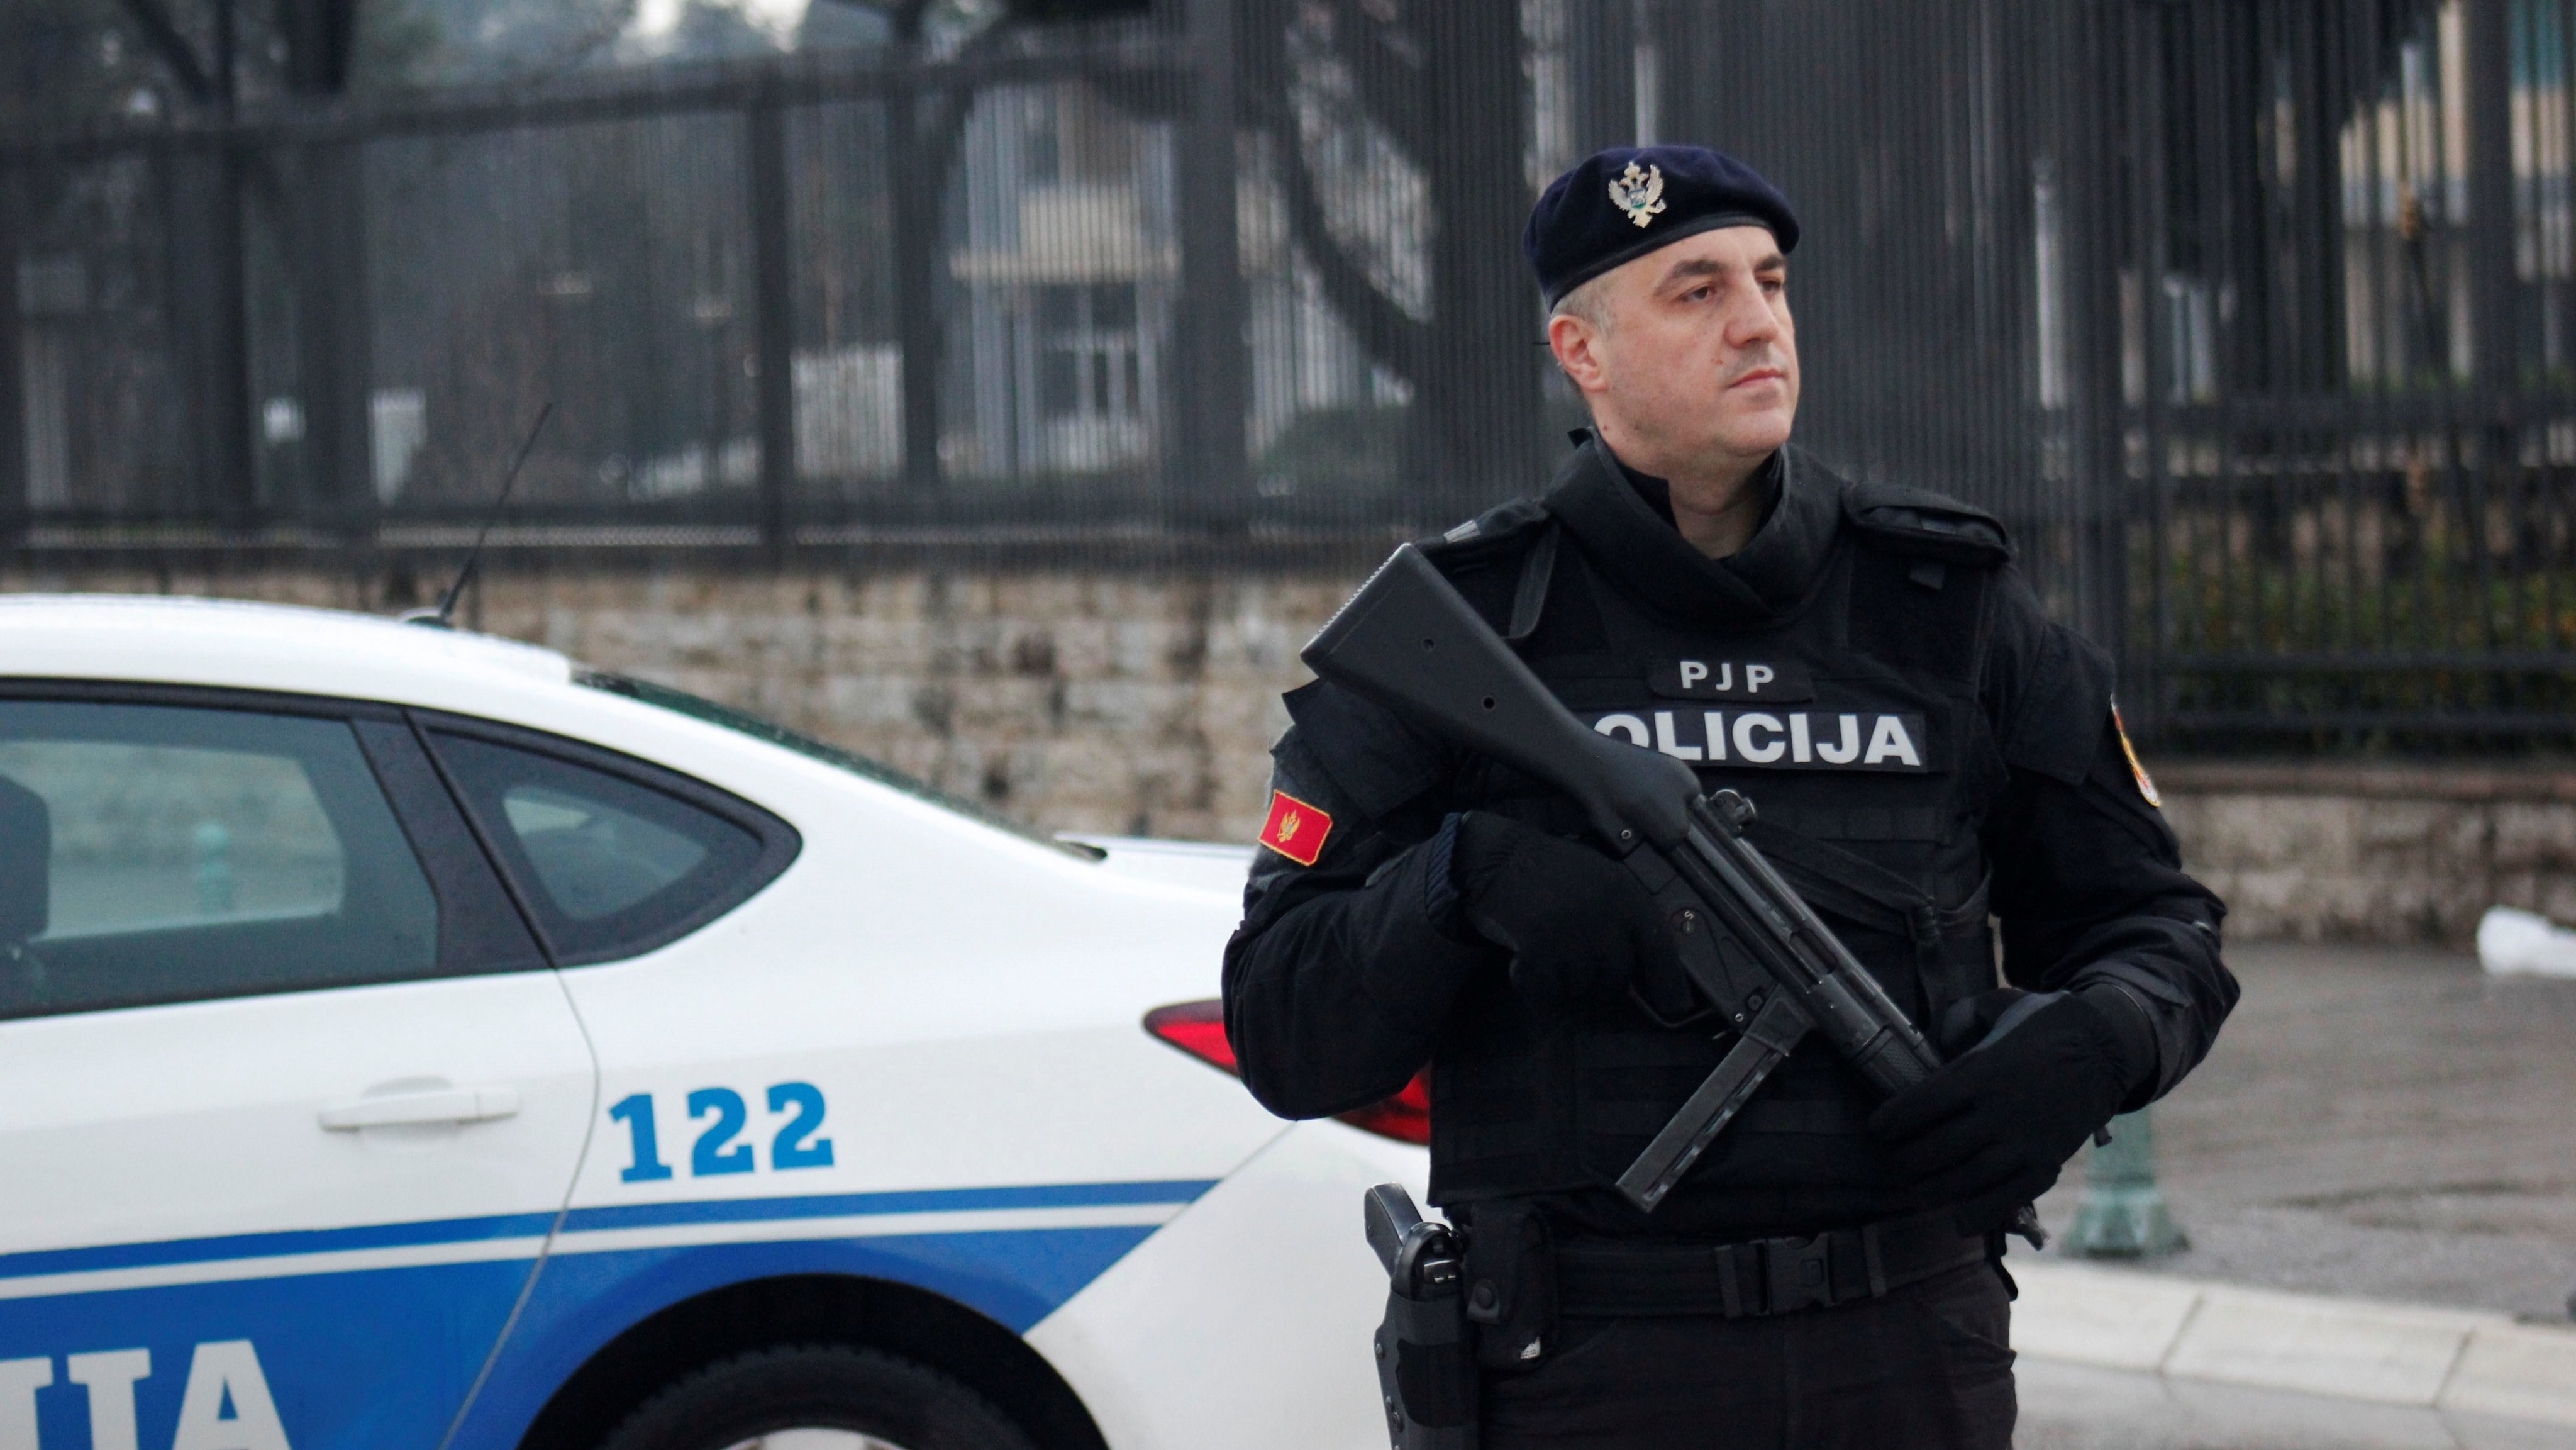 US Embassy in Montenegro attacked with grenade